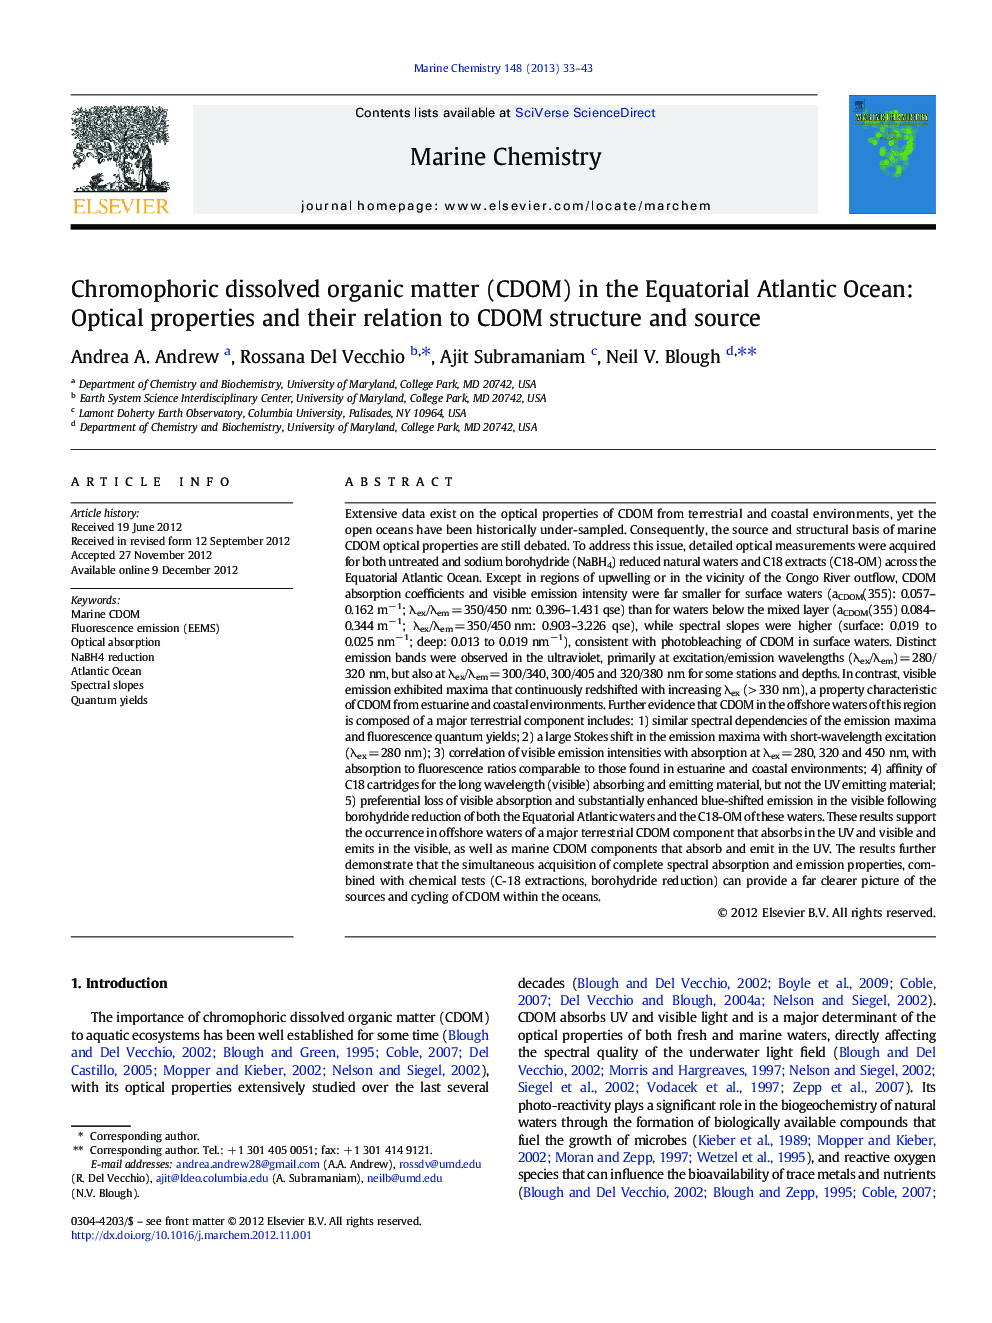 Chromophoric dissolved organic matter (CDOM) in the Equatorial Atlantic Ocean: Optical properties and their relation to CDOM structure and source